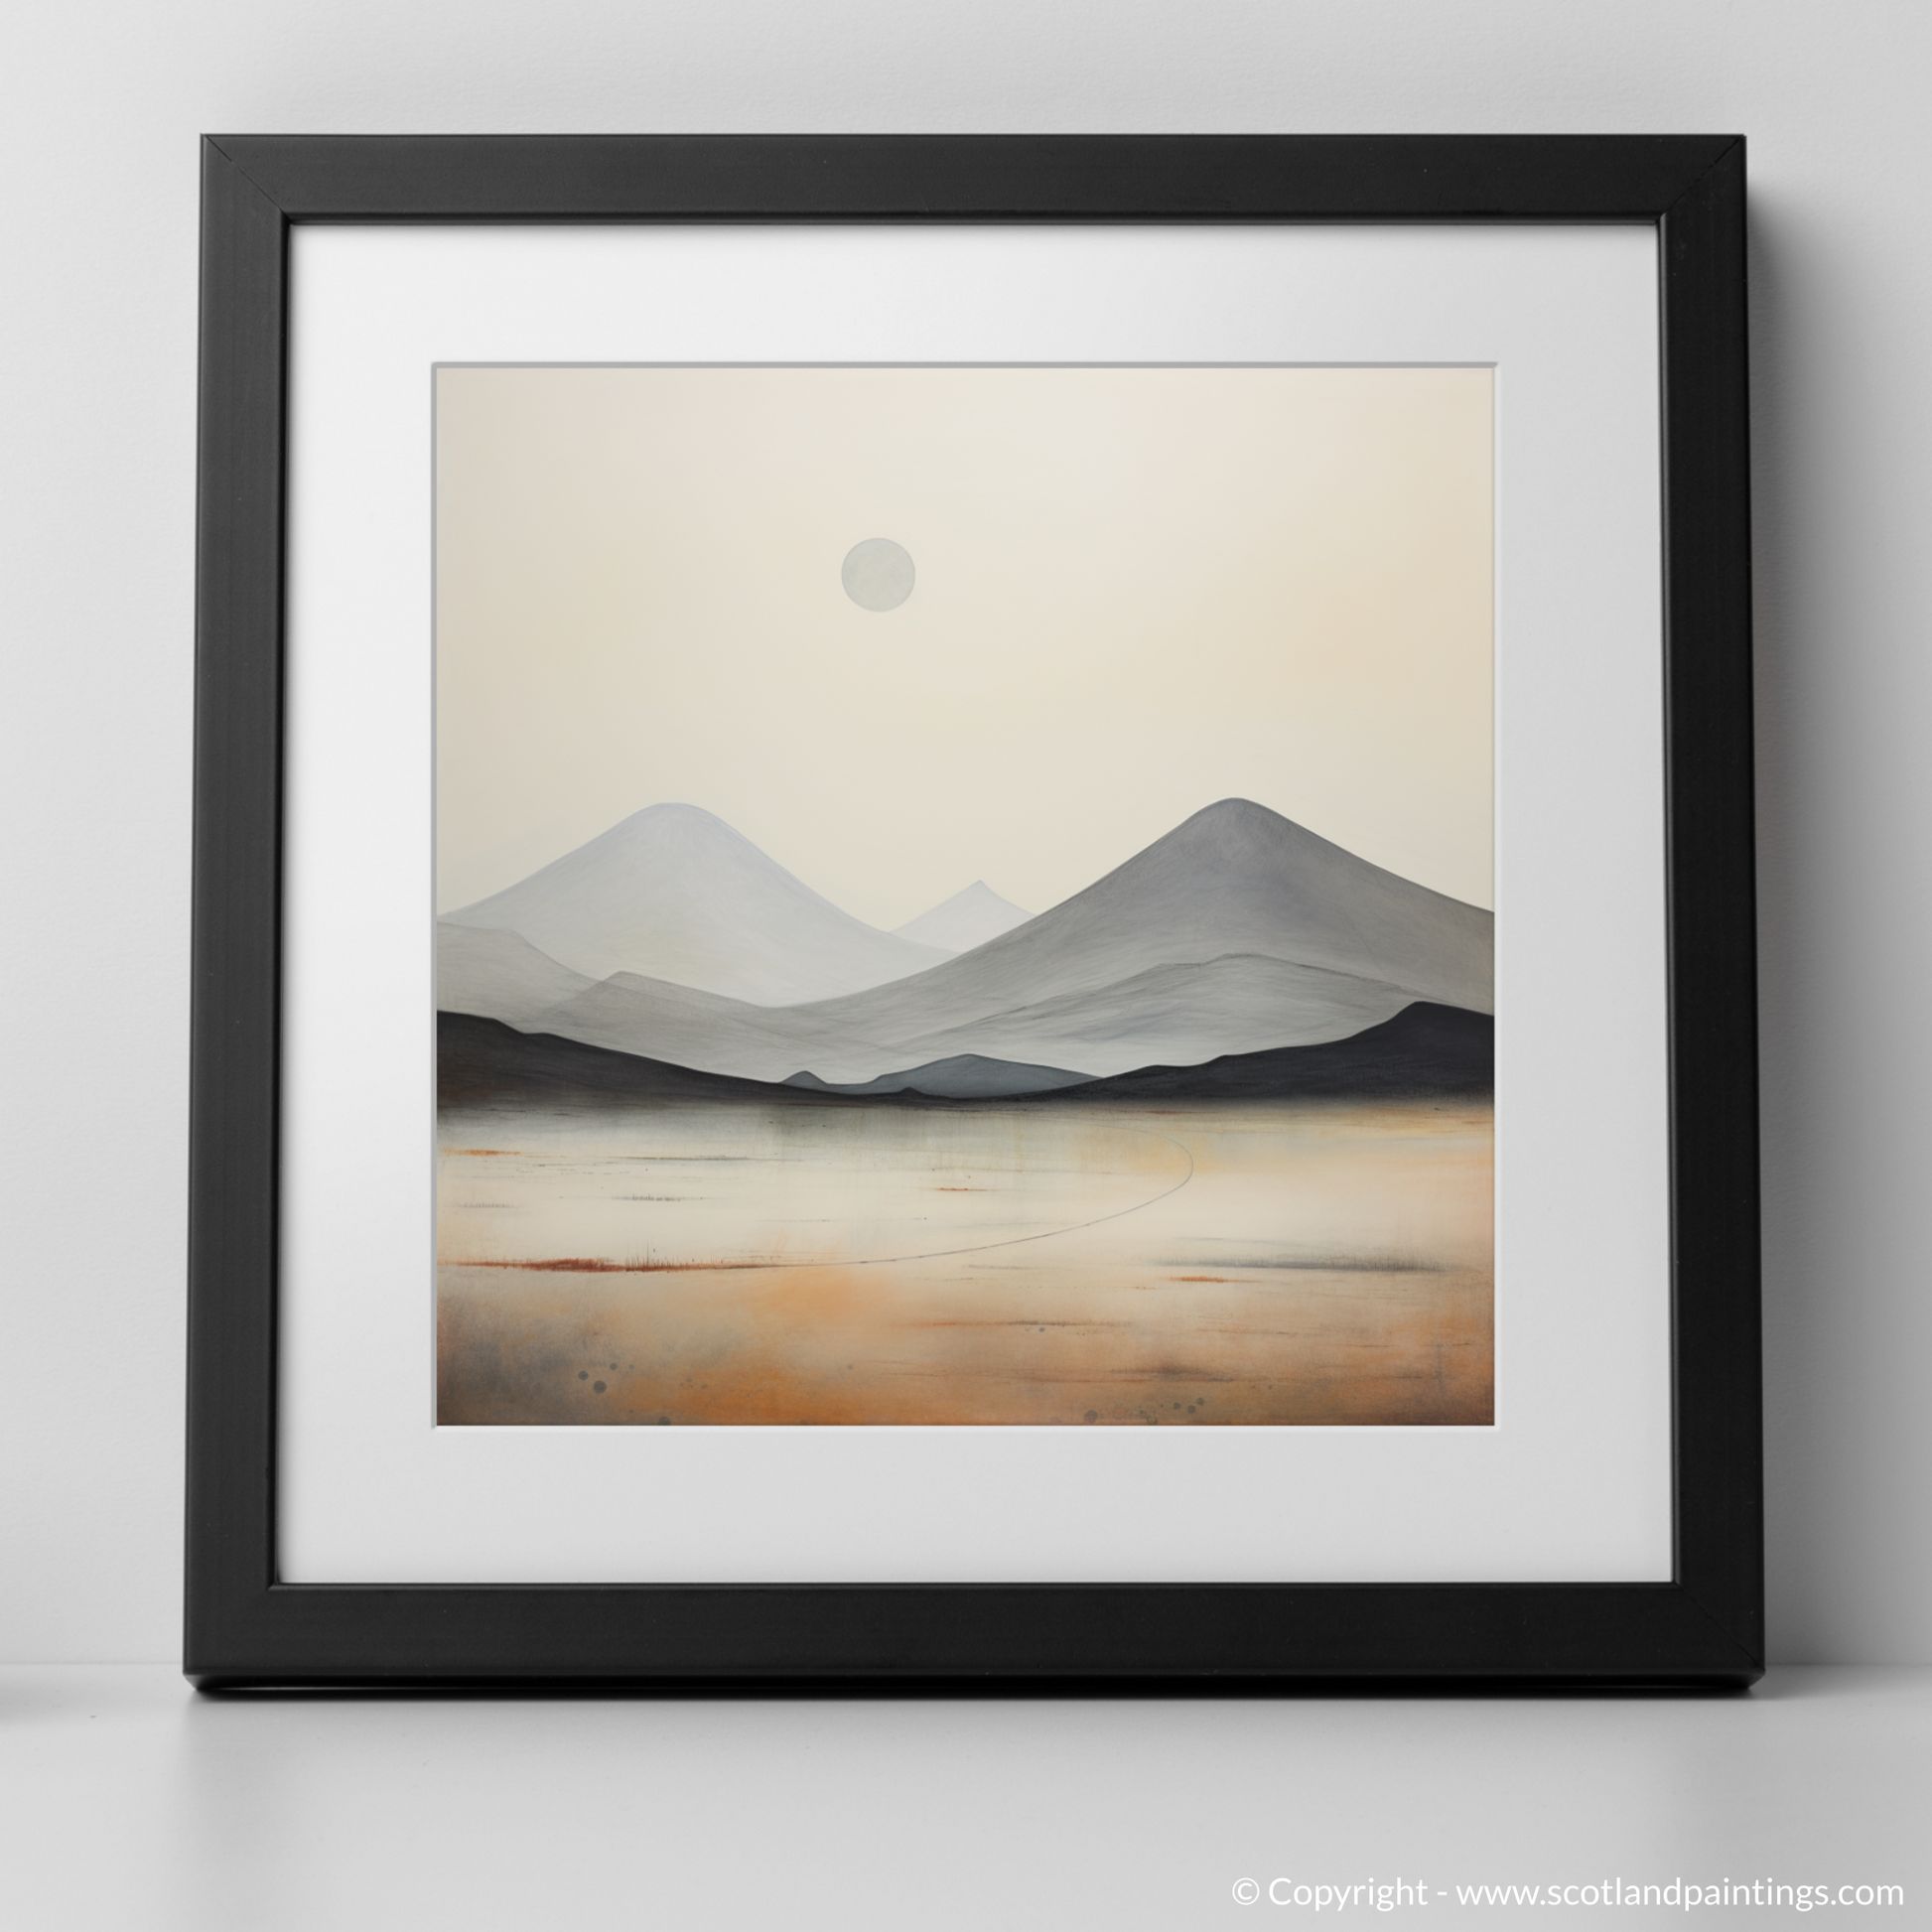 Art Print of Meall Greigh with a black frame